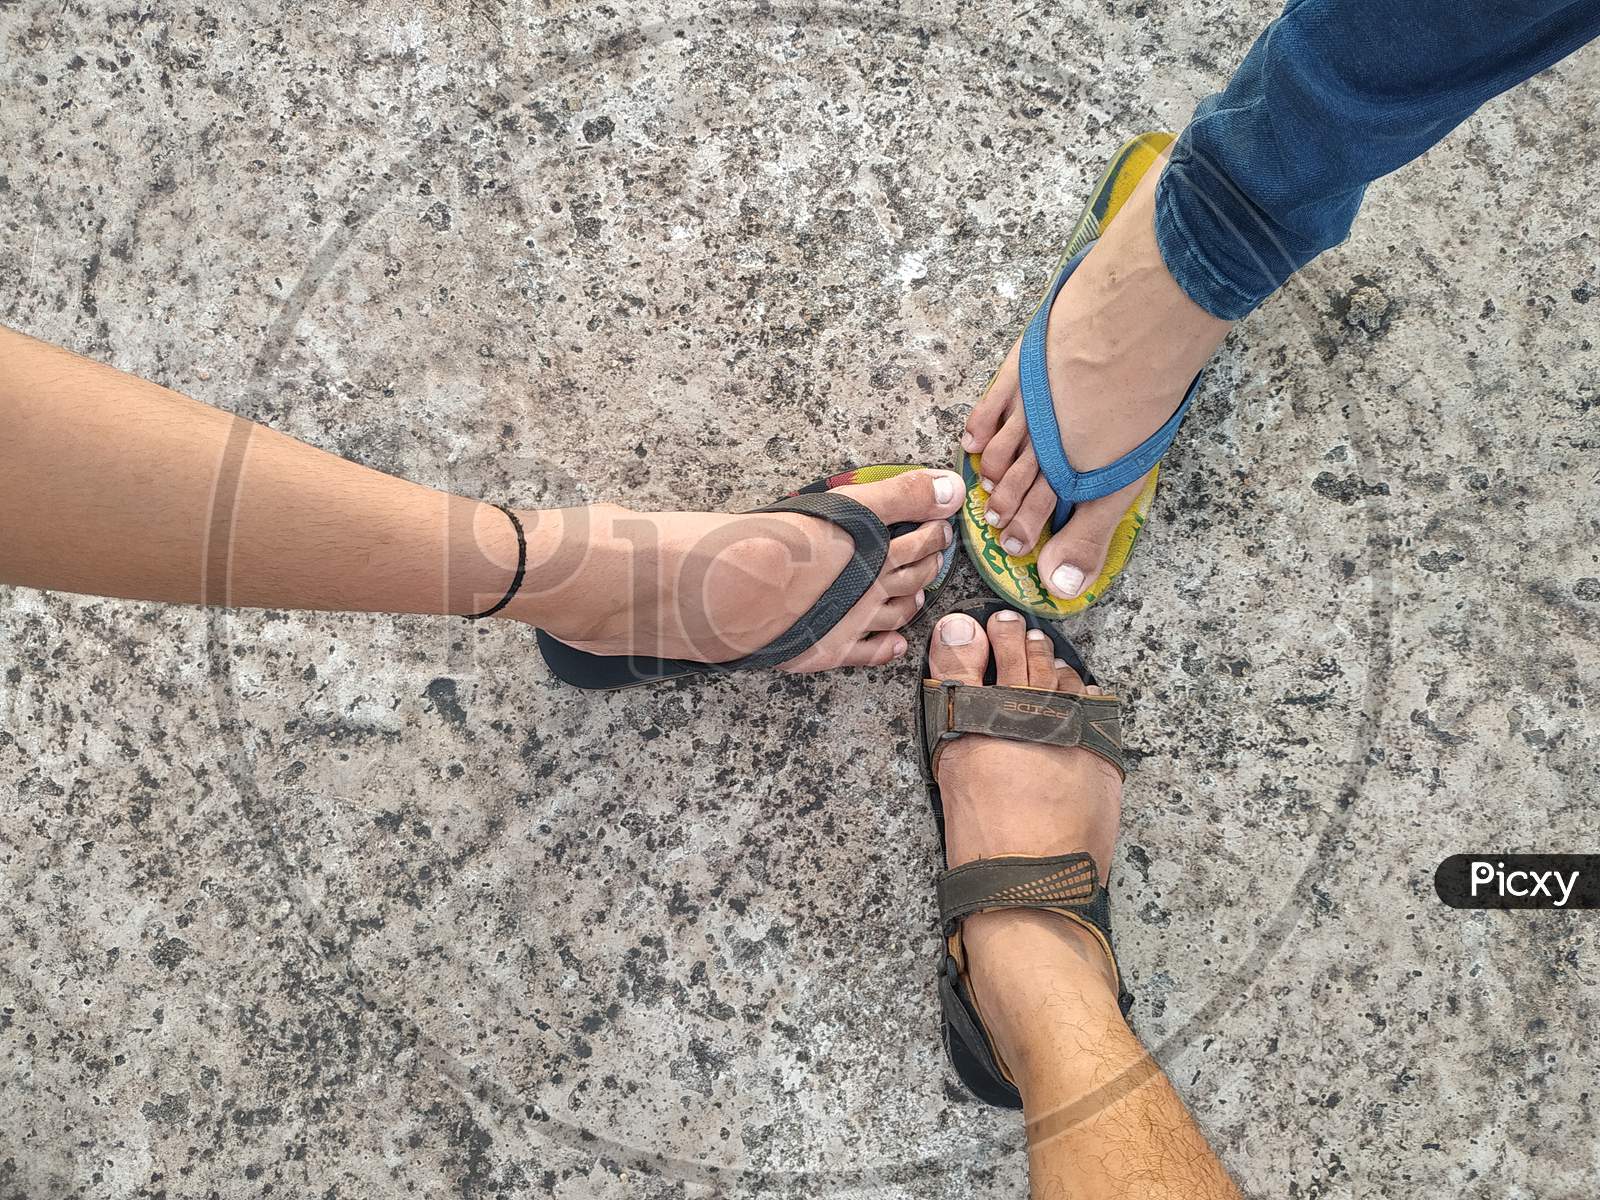 Three feets together showing friendship